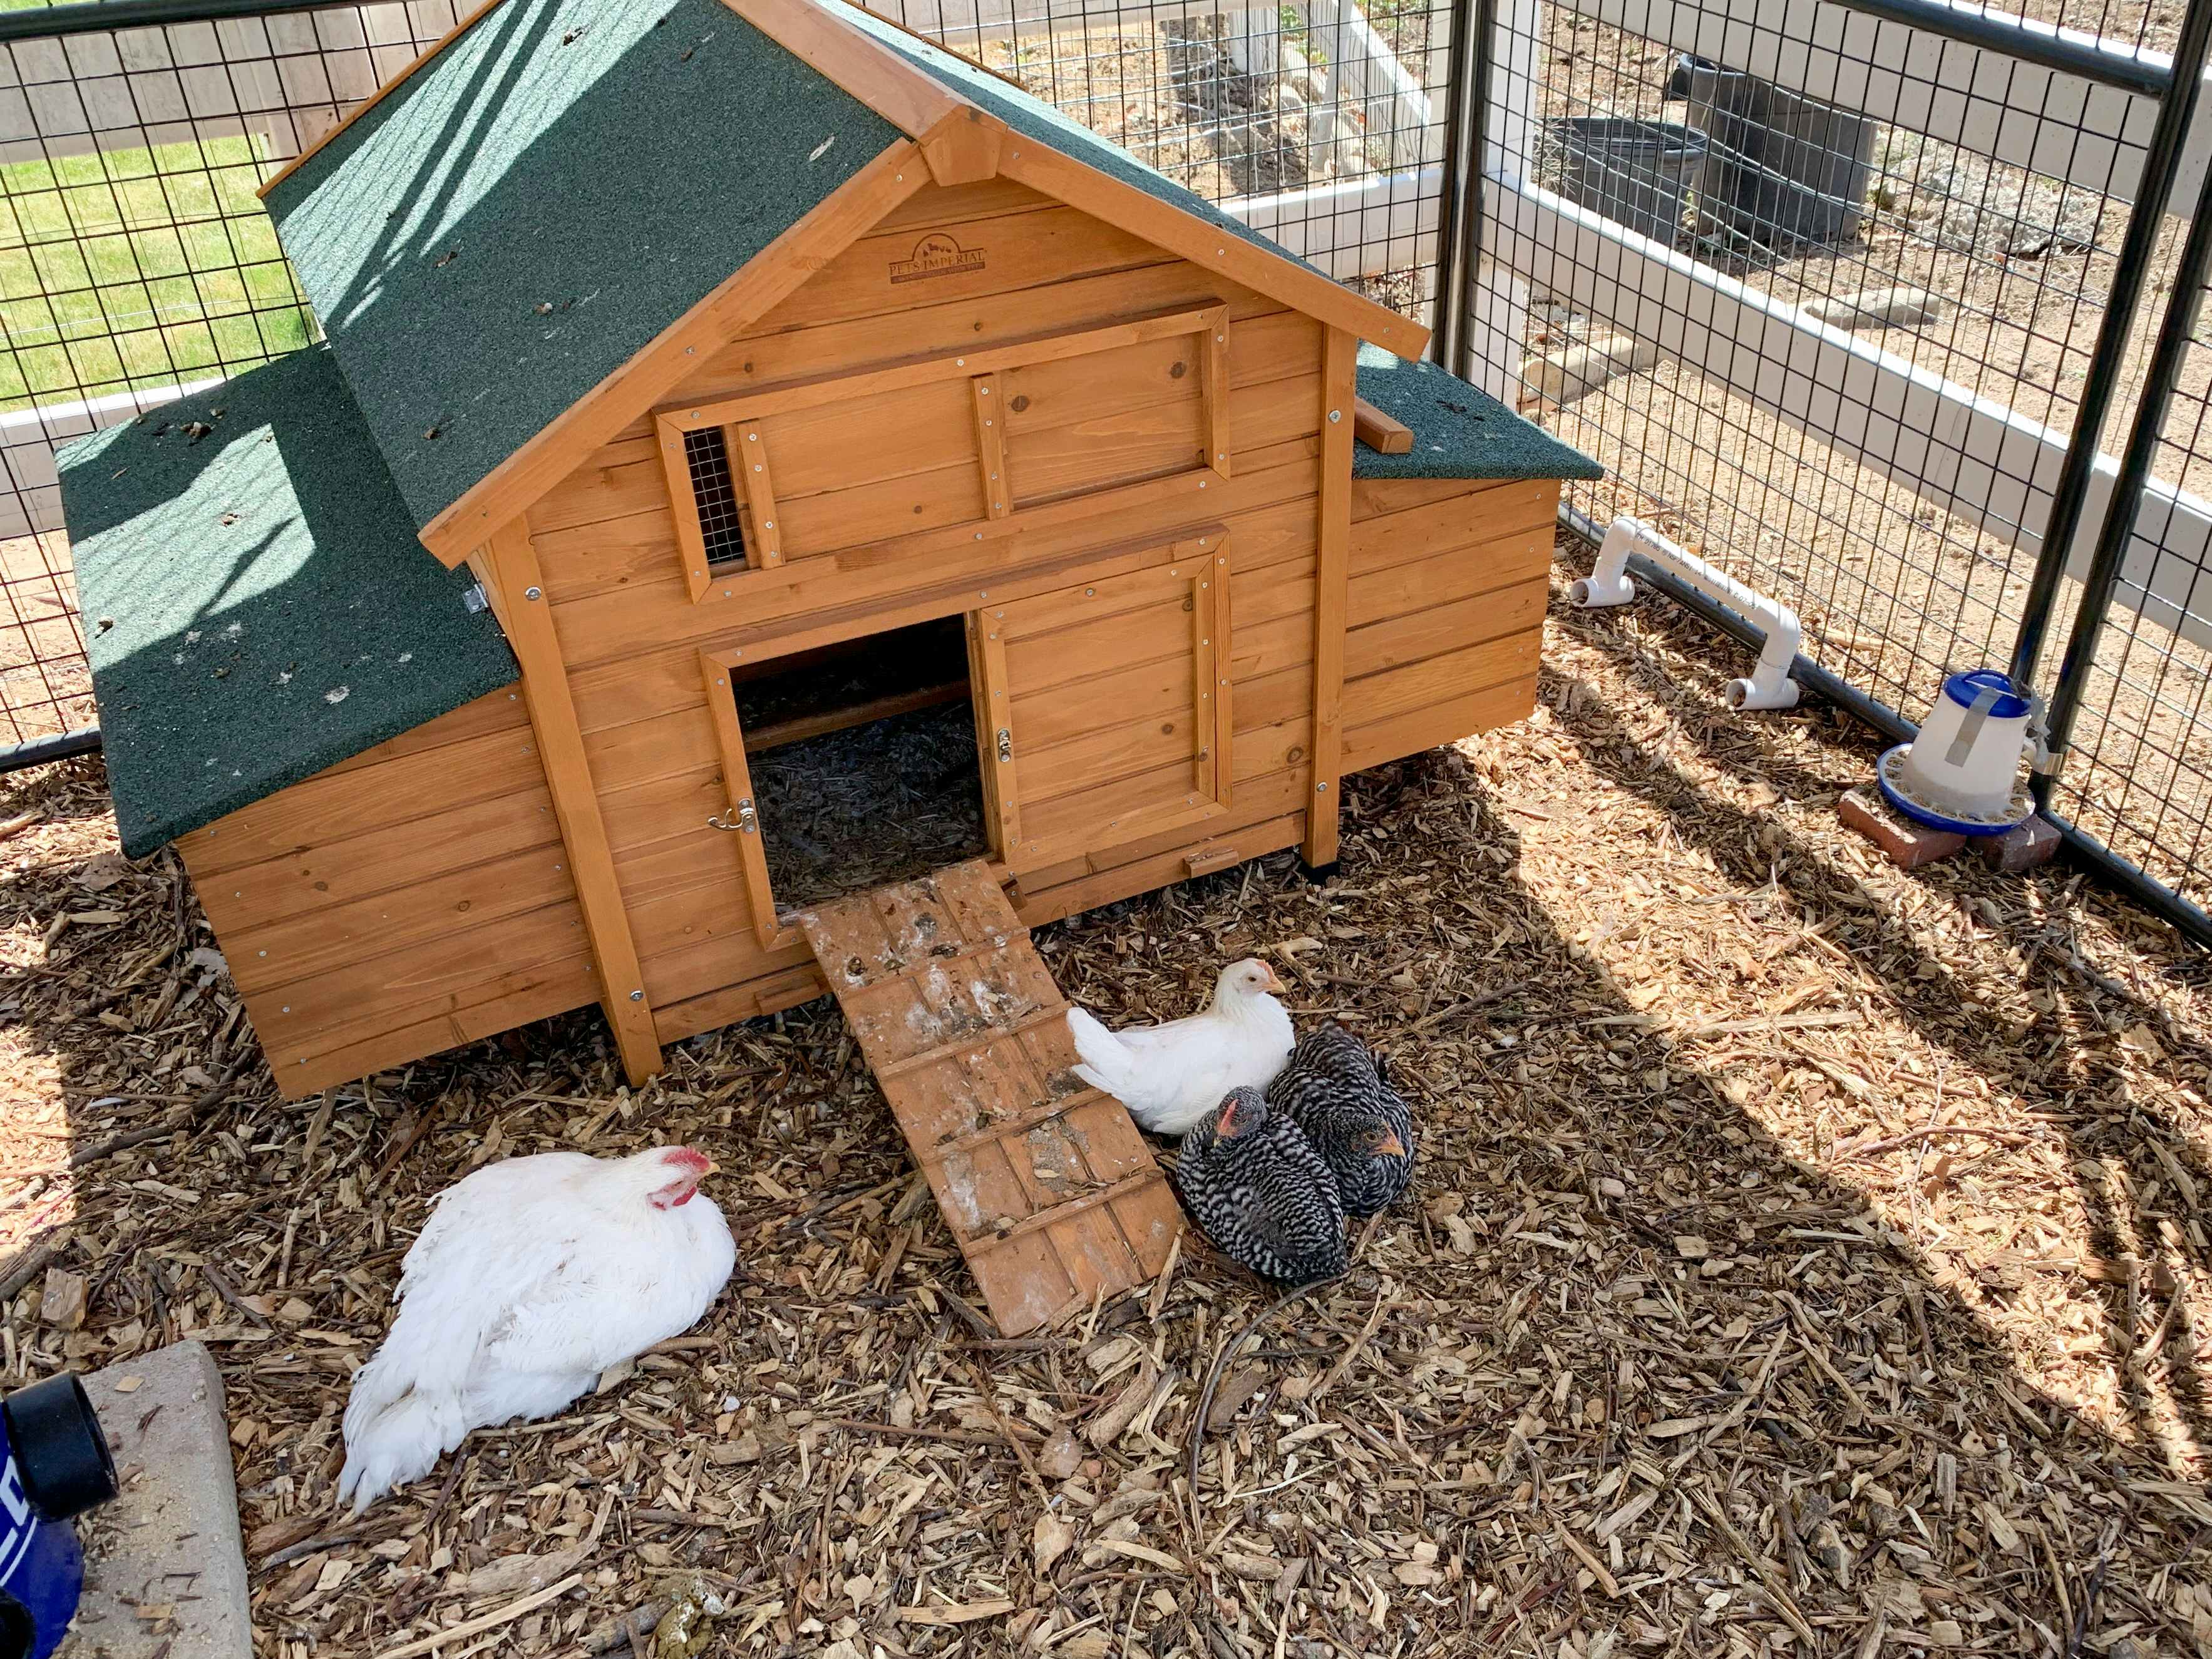 Some chickens in a fenced area, sitting beside their coop